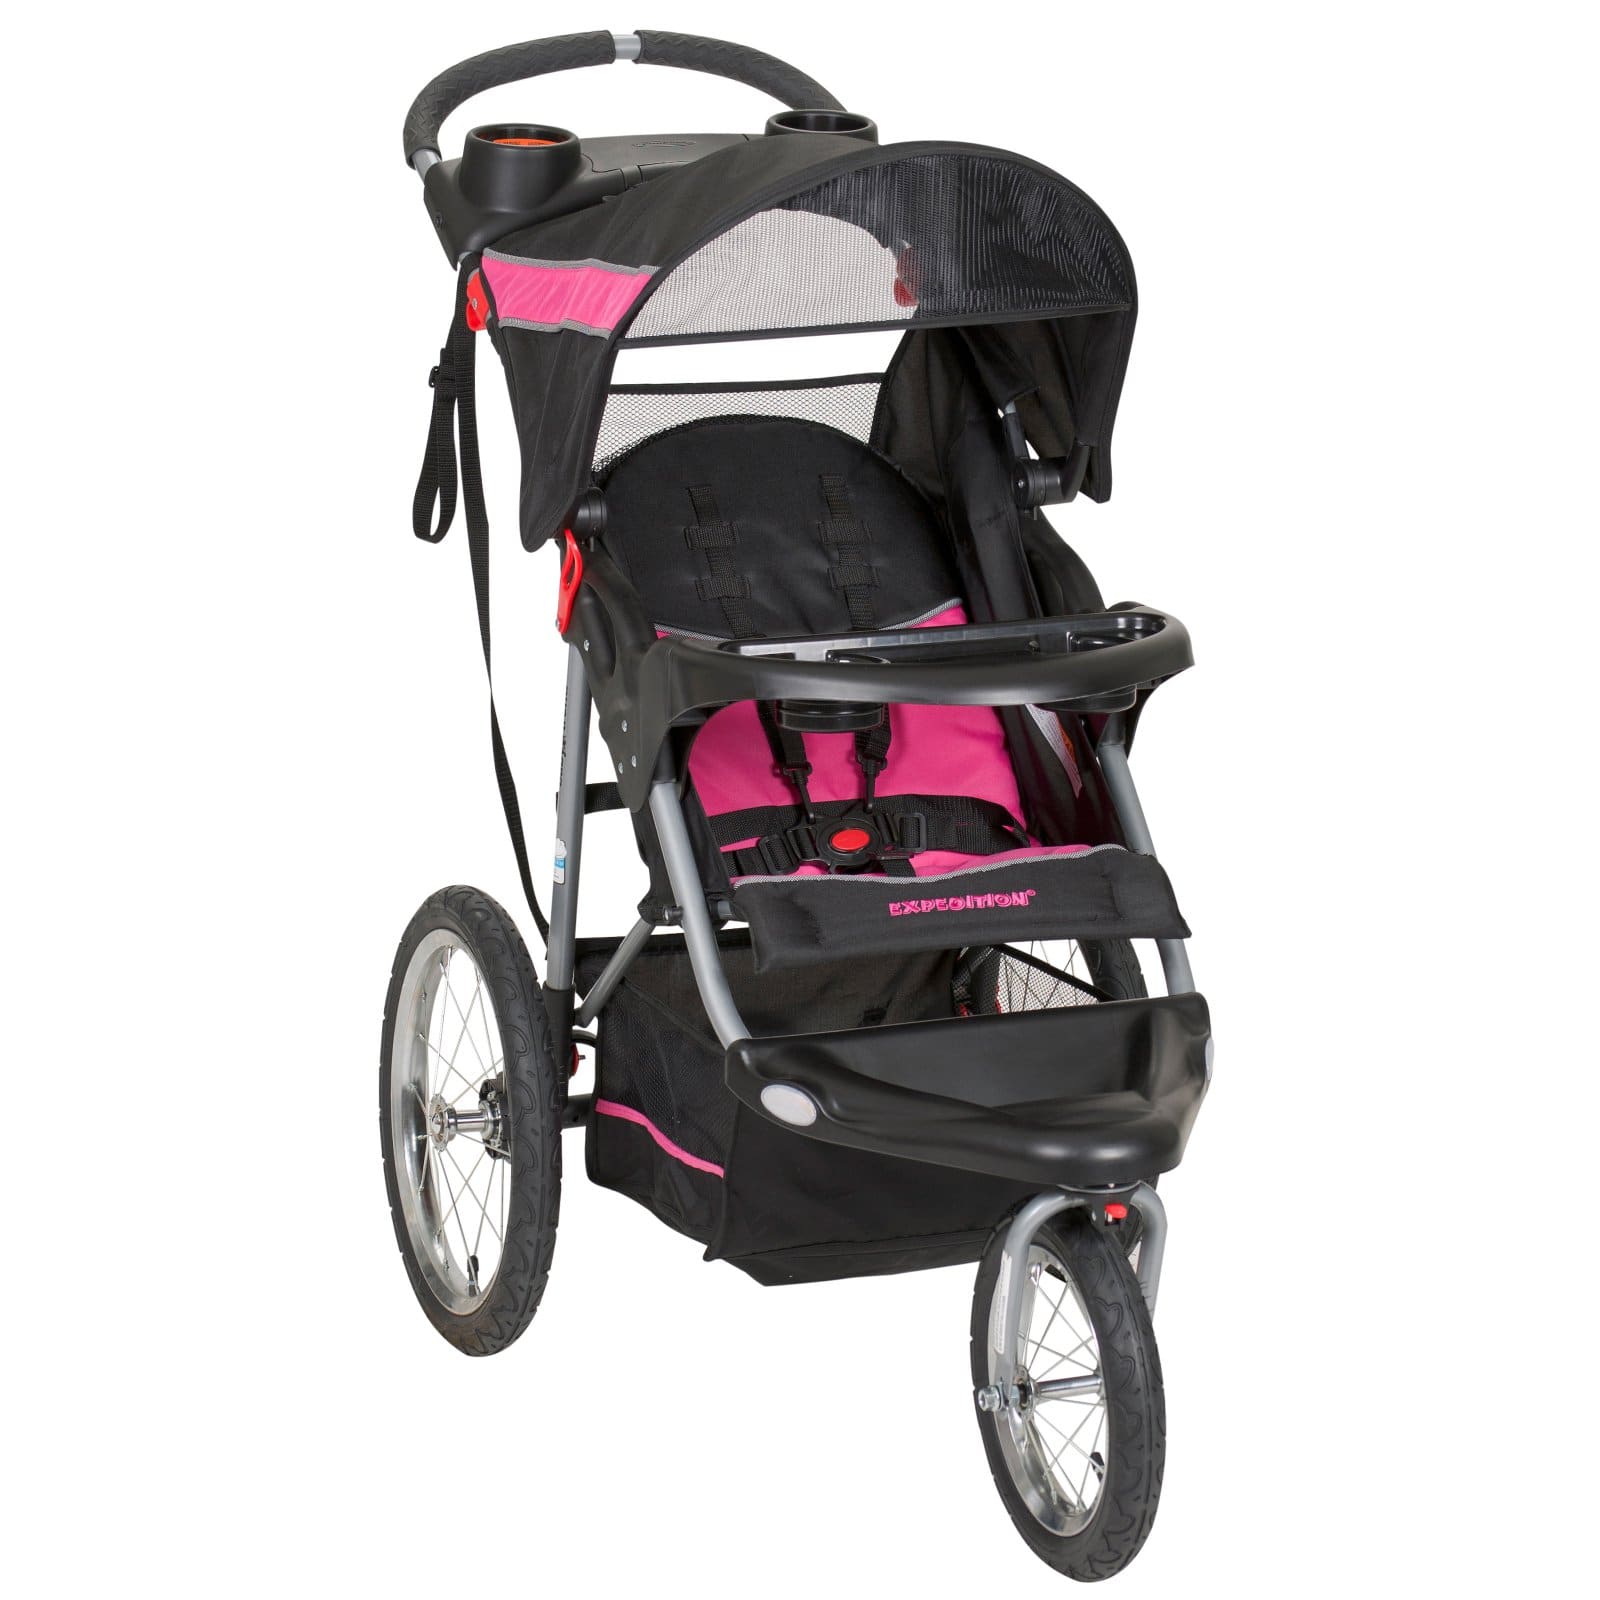 Baby Trend Expedition Jogging Stroller, Bubble Gum - image 1 of 7